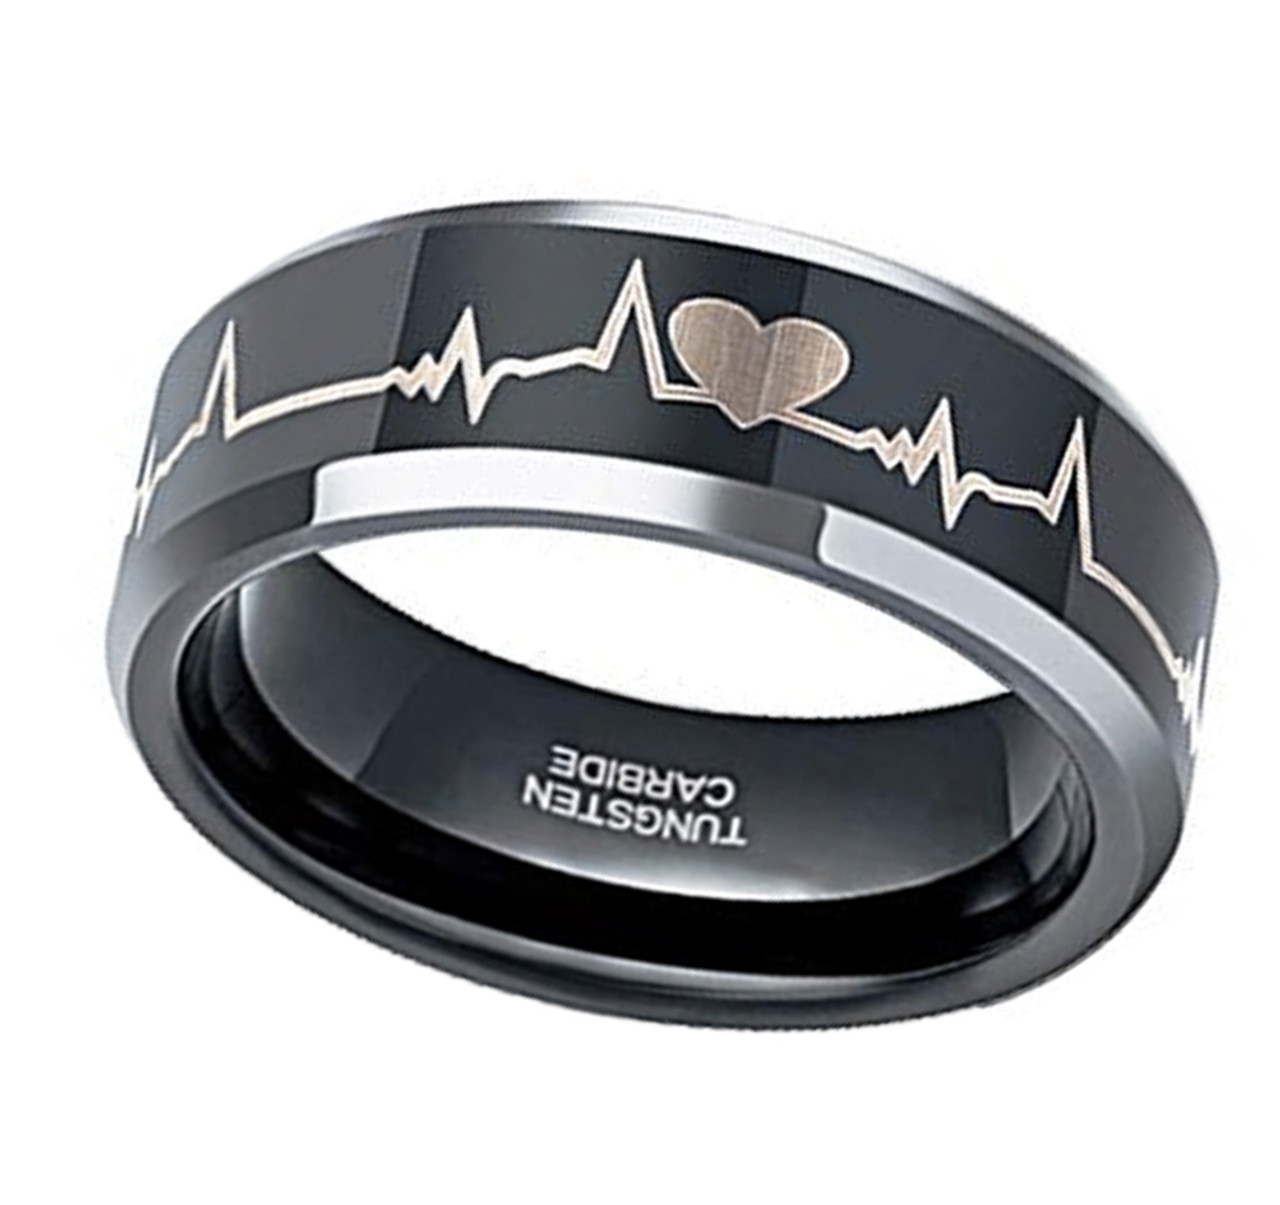 (8mm)  Unisex or Men's EKG Heartbeat Wedding ring band. Black Tungsten Carbide with Silver tone edges. Laser Etched Heart Life-line. Comfort Fit Love Ring